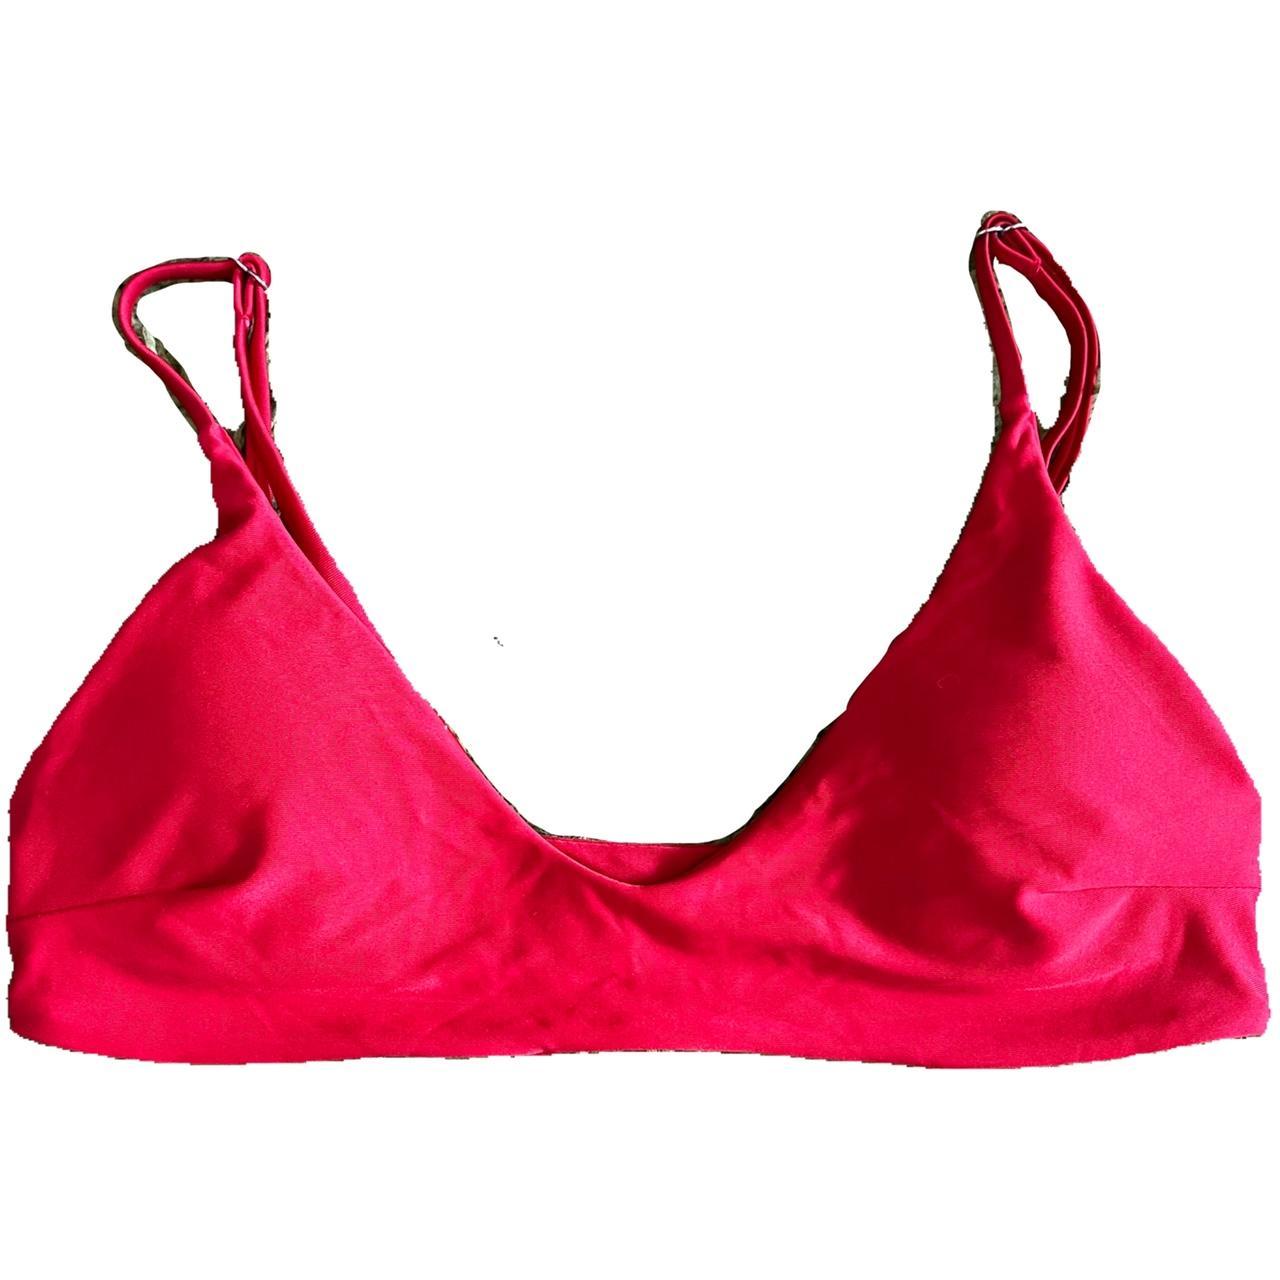 red basic bathing suit top from shein #shein... - Depop